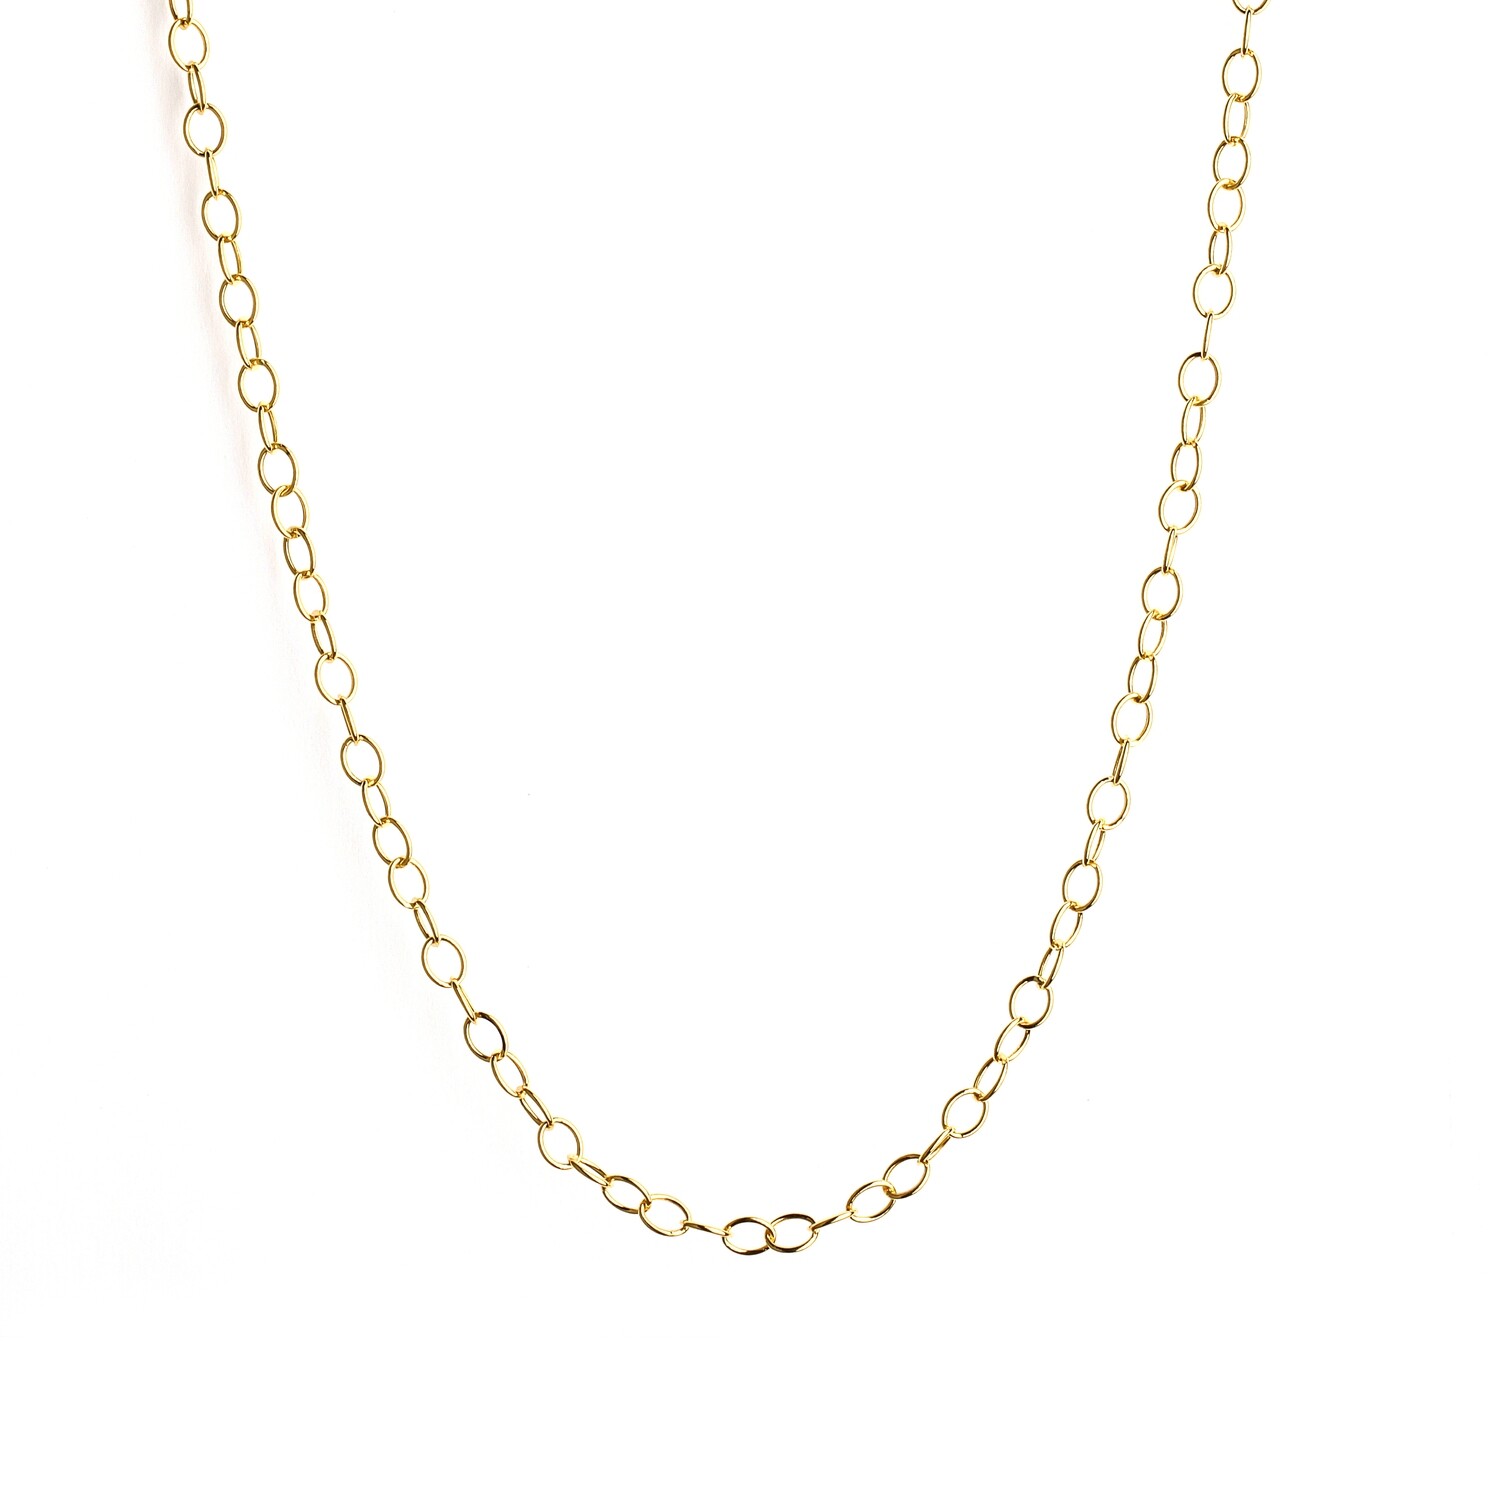 30" 18k oval link chain (4.75) w lobster clasp